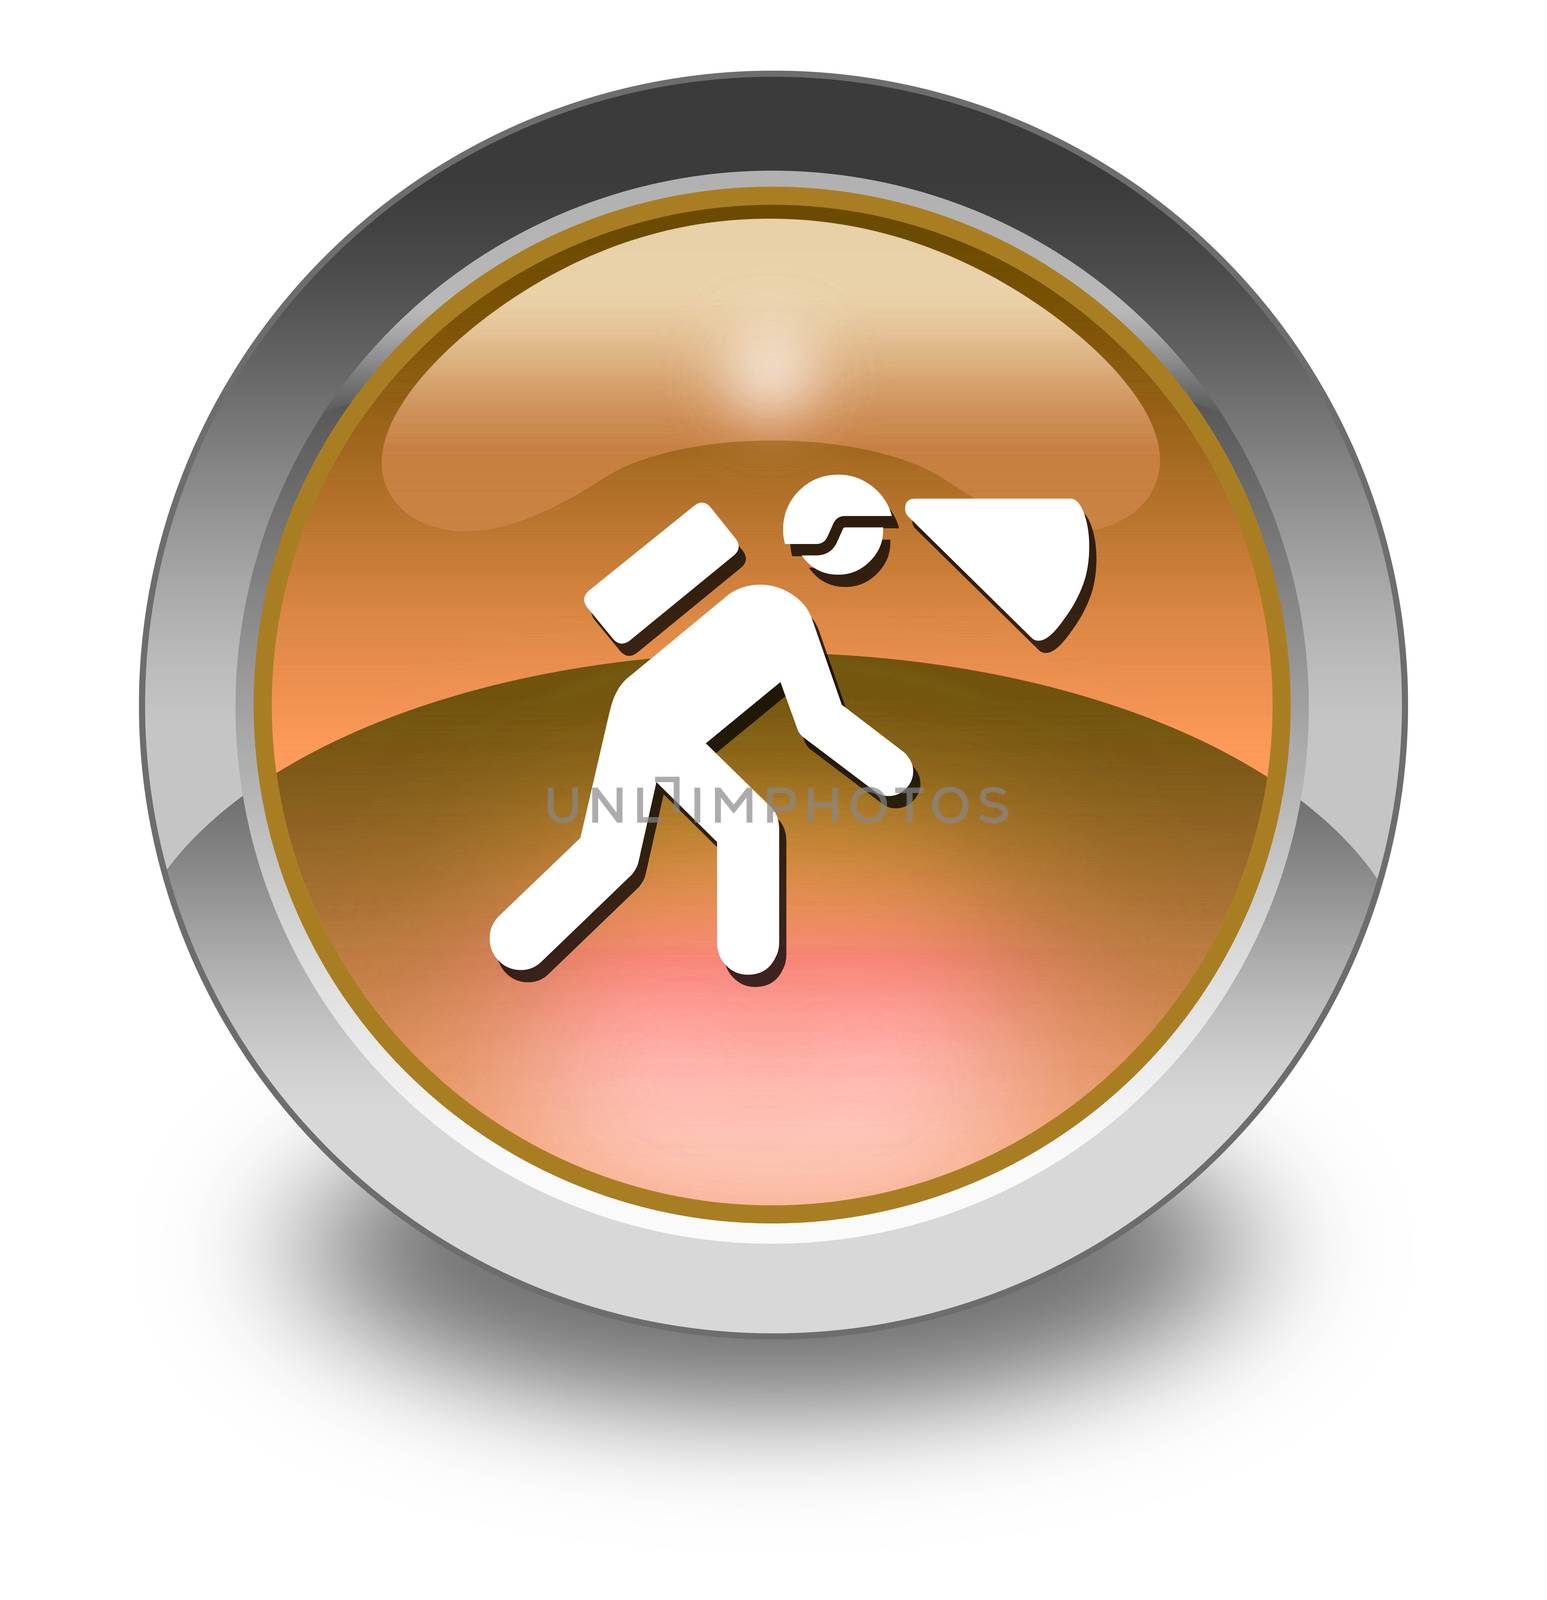 Icon, Button, Pictogram Spelunking by mindscanner